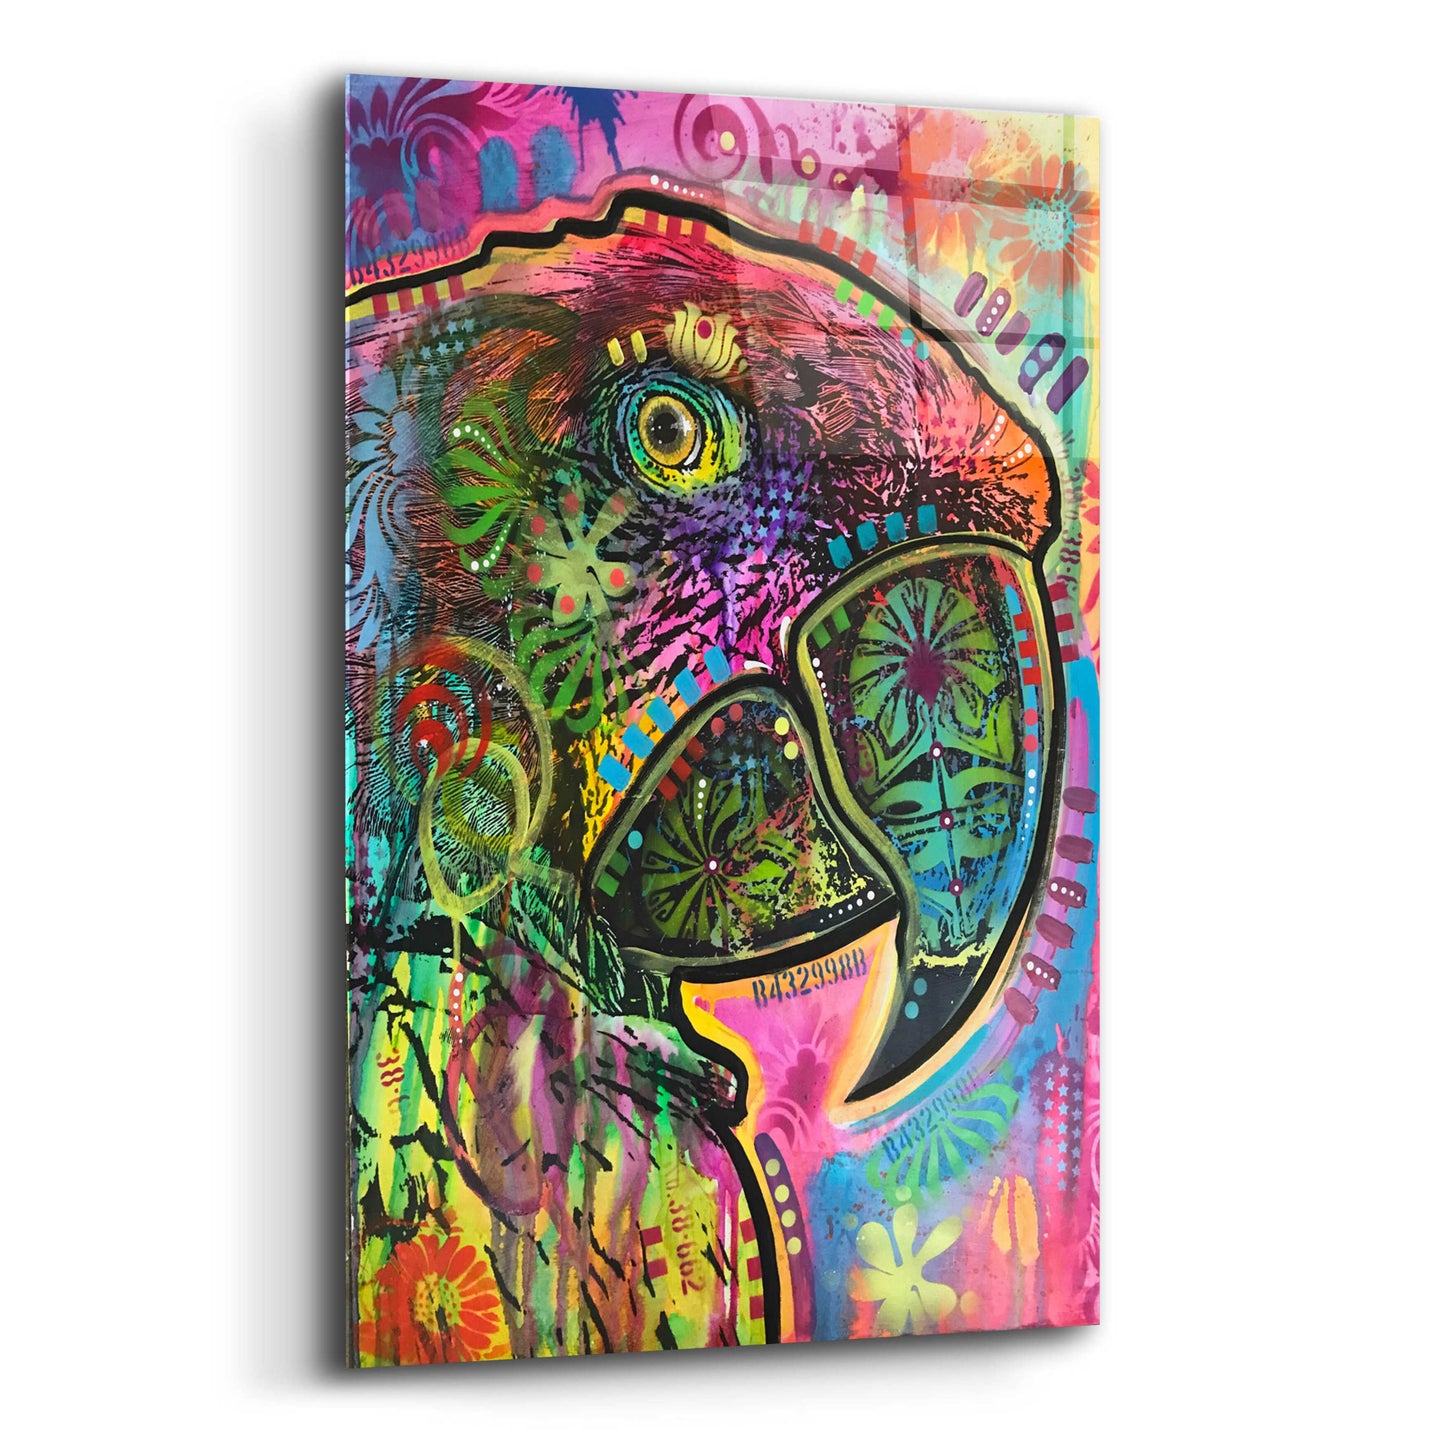 Epic Art 'Close Up Parrot' by Dean Russo, Acrylic Glass Wall Art,12x16